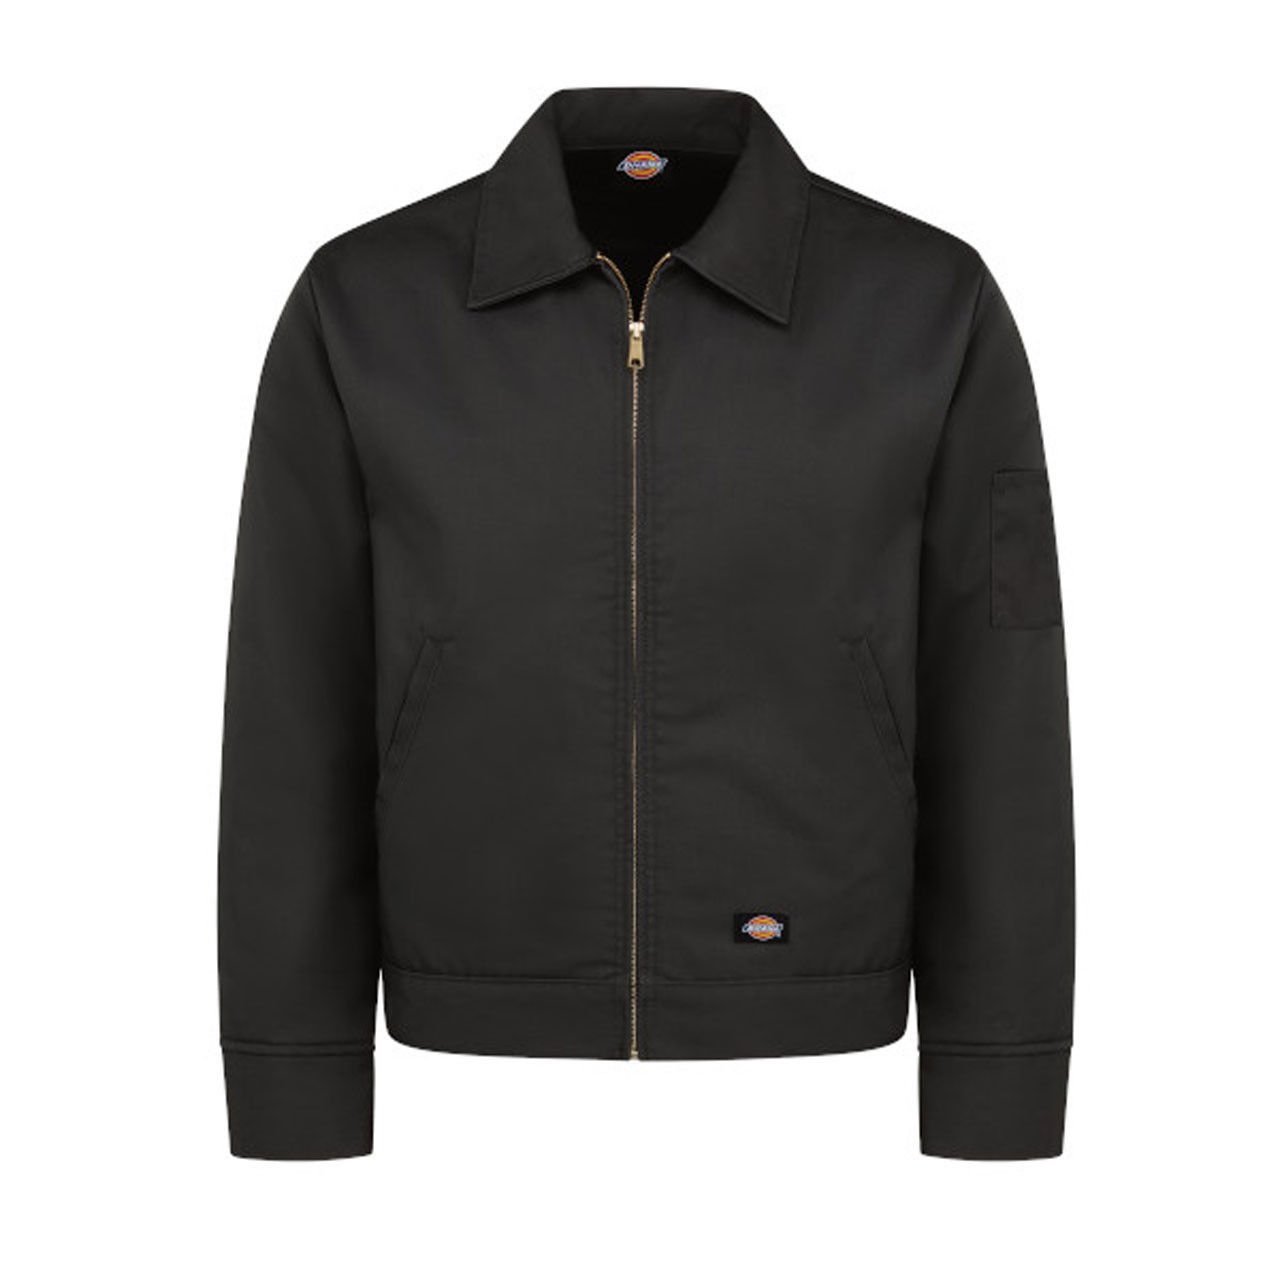 What features does the black Dickies jacket TJ55 possess?